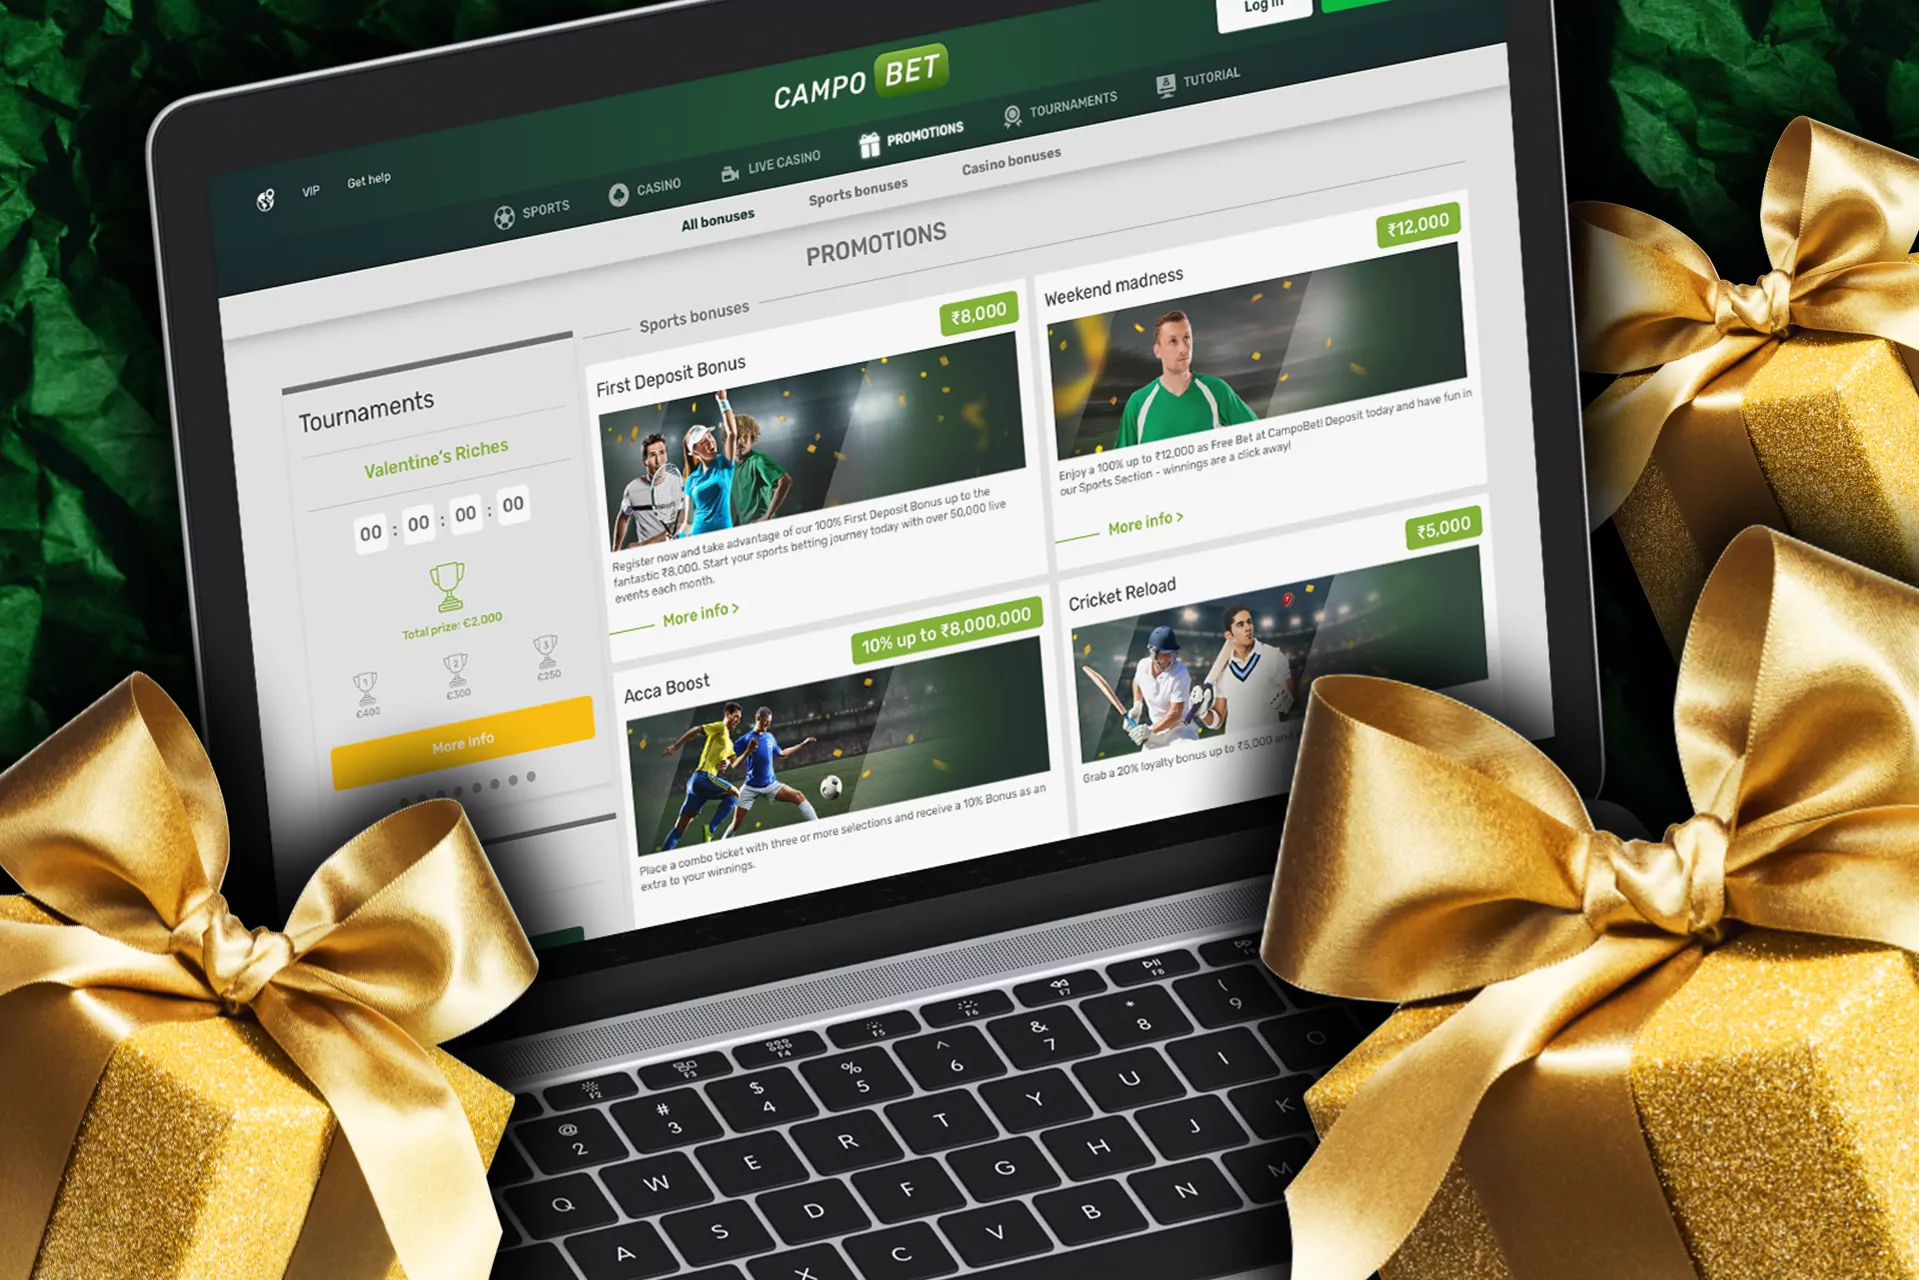 Campobet offers many other bonuses for regular bettors.